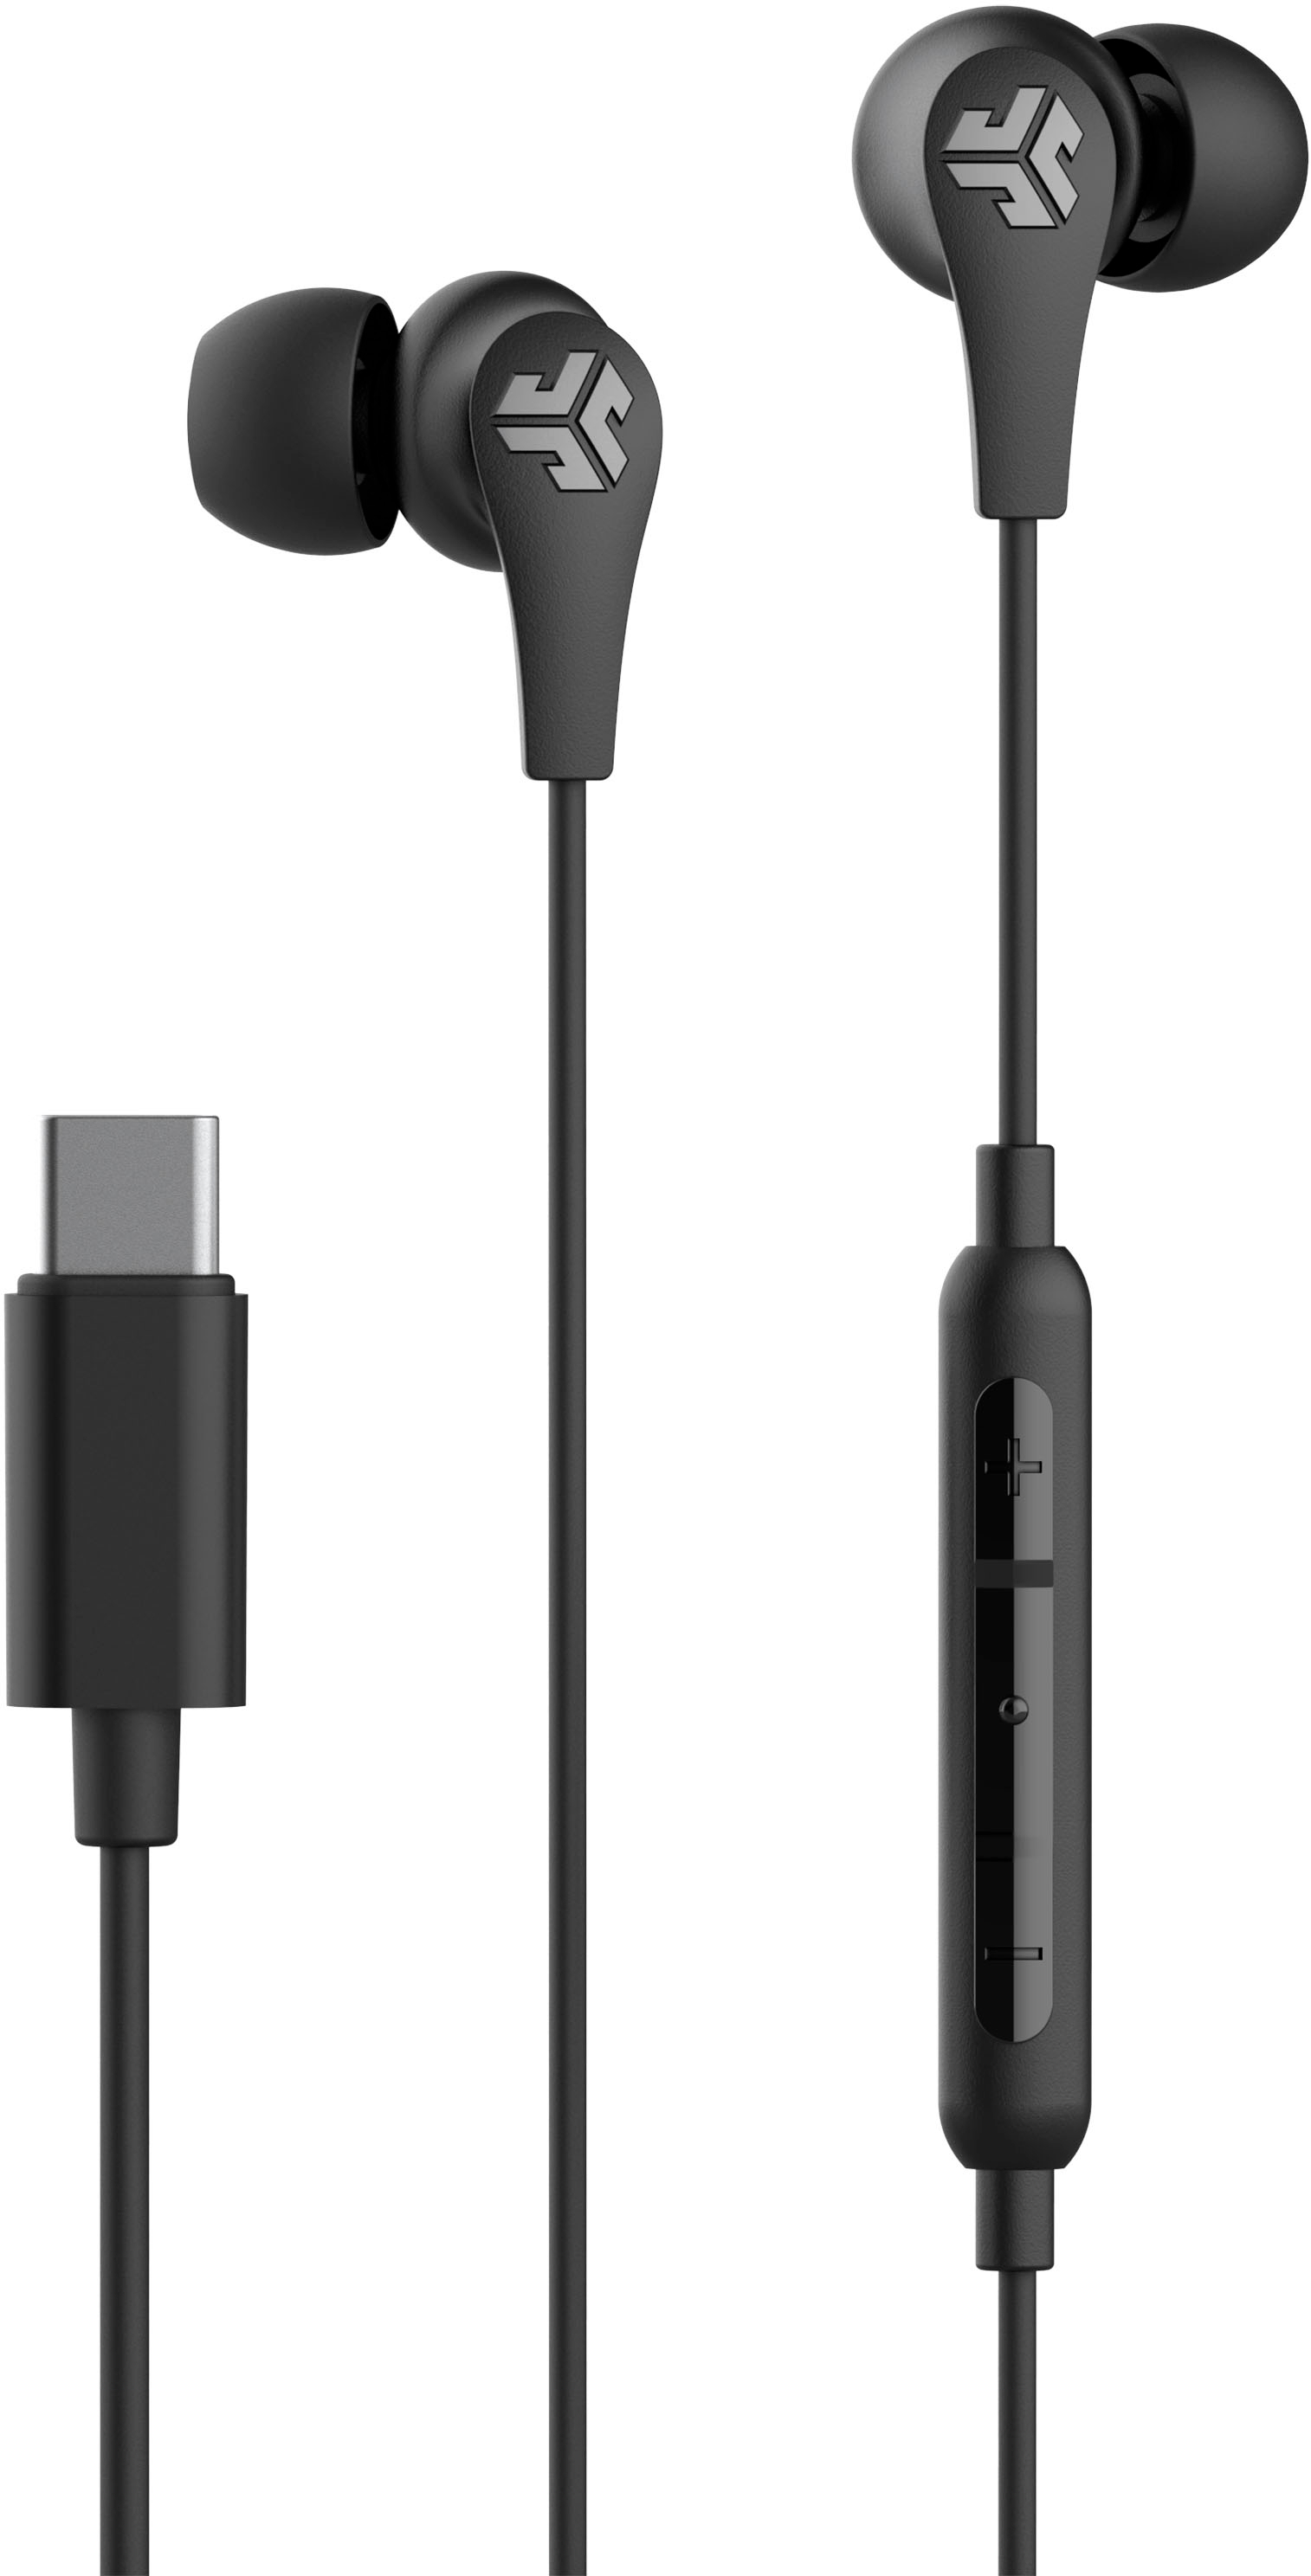 NEW Apple USB-C EarPods Tested on Various Devices - Samsung